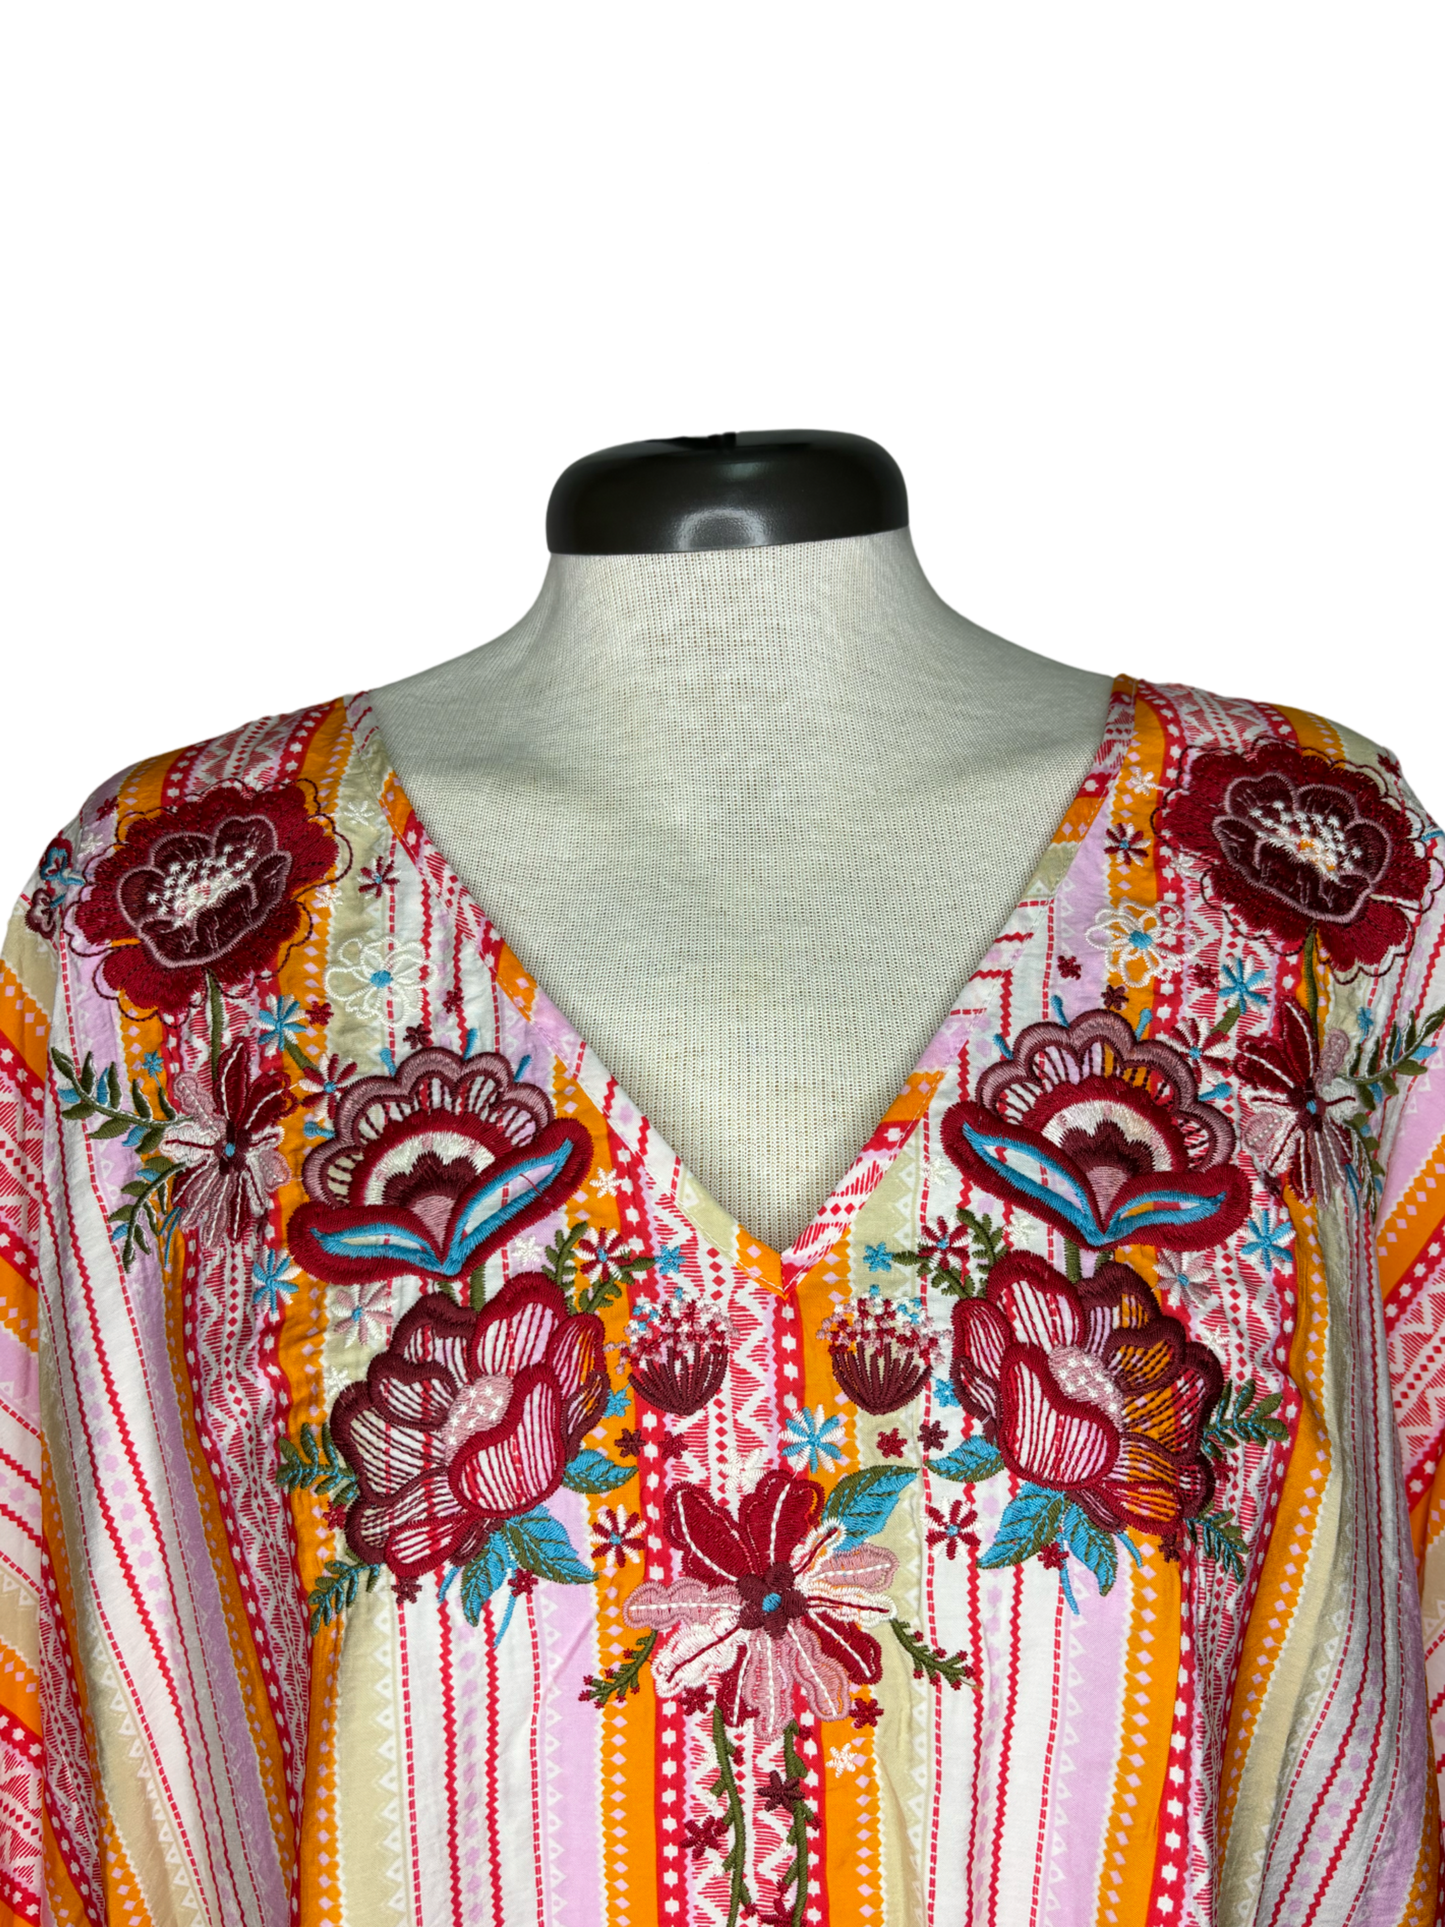 Stripe Floral Embroidered Top